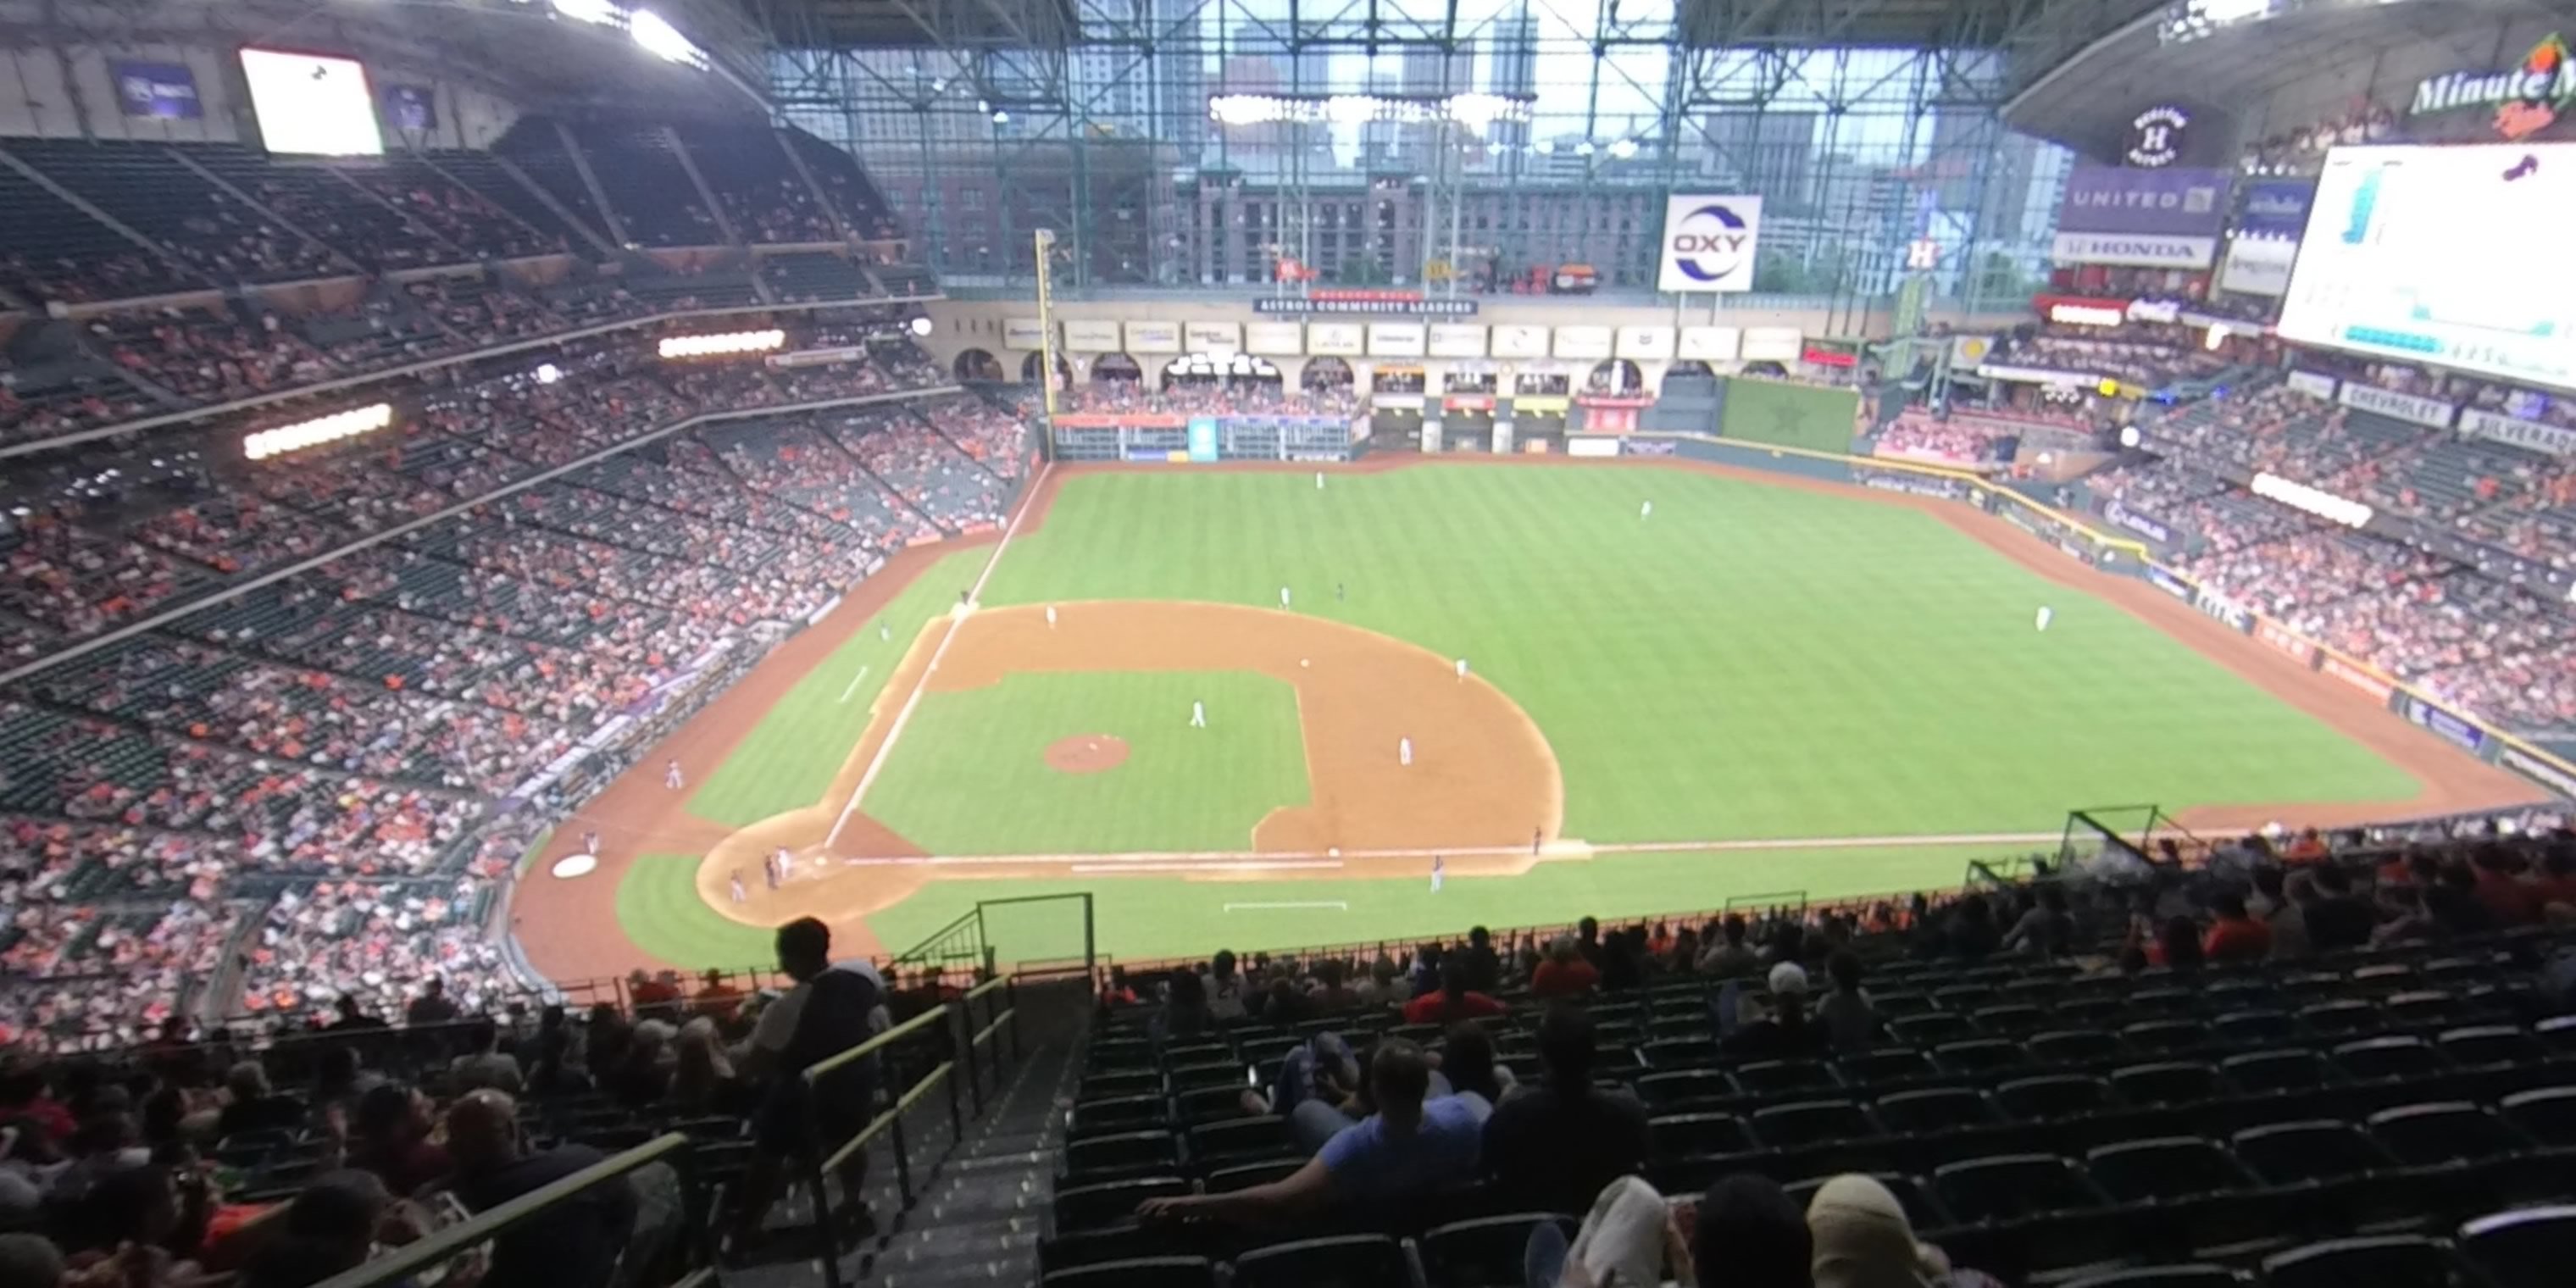 section 424 panoramic seat view  for baseball - minute maid park